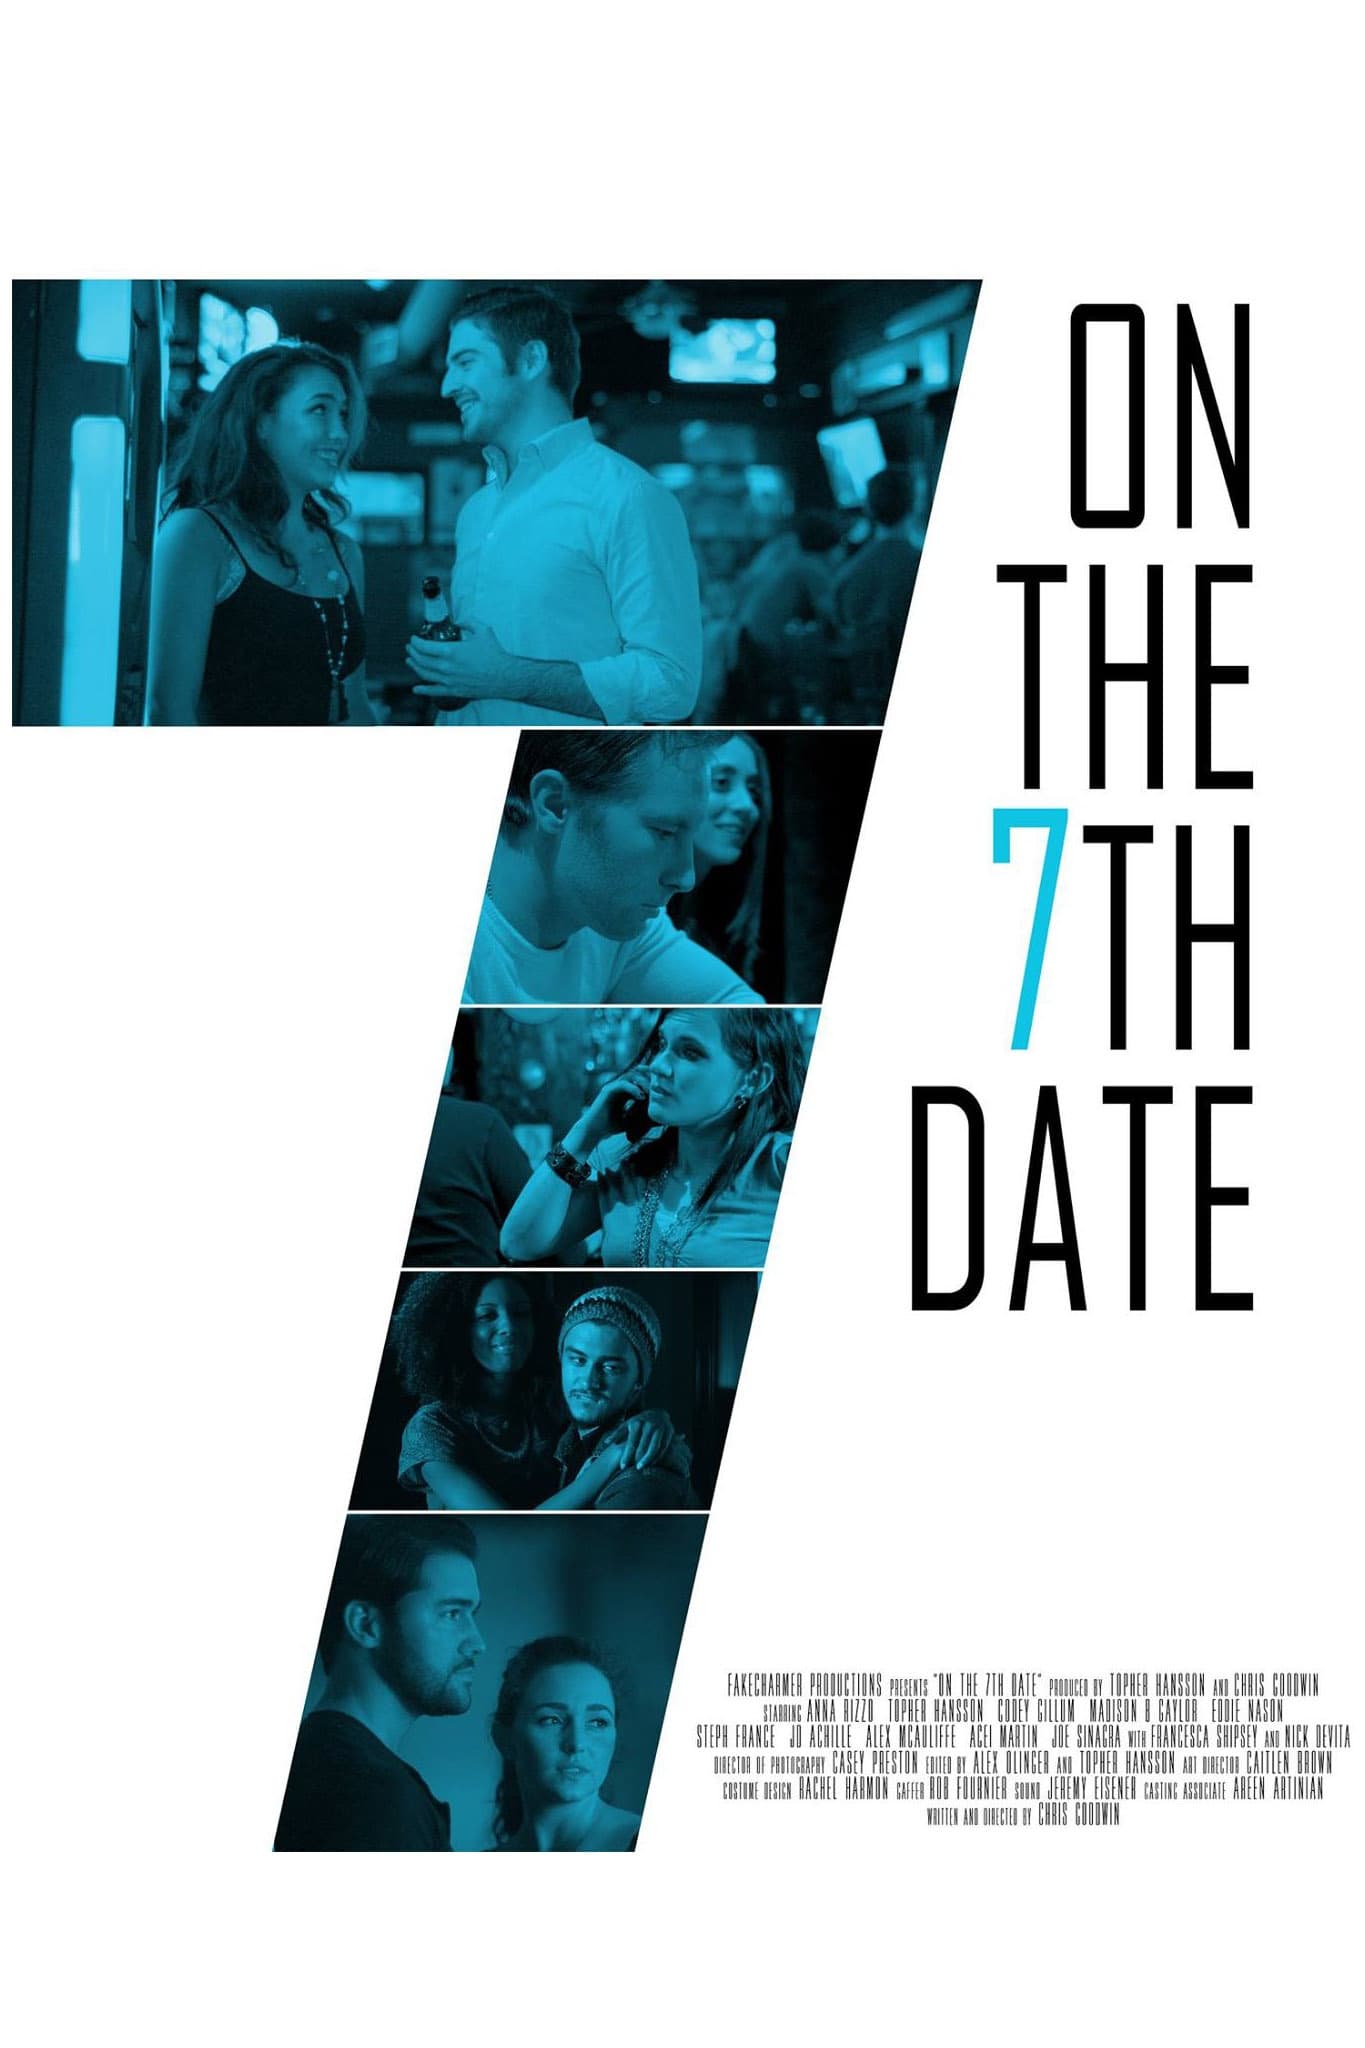 On the 7th Date